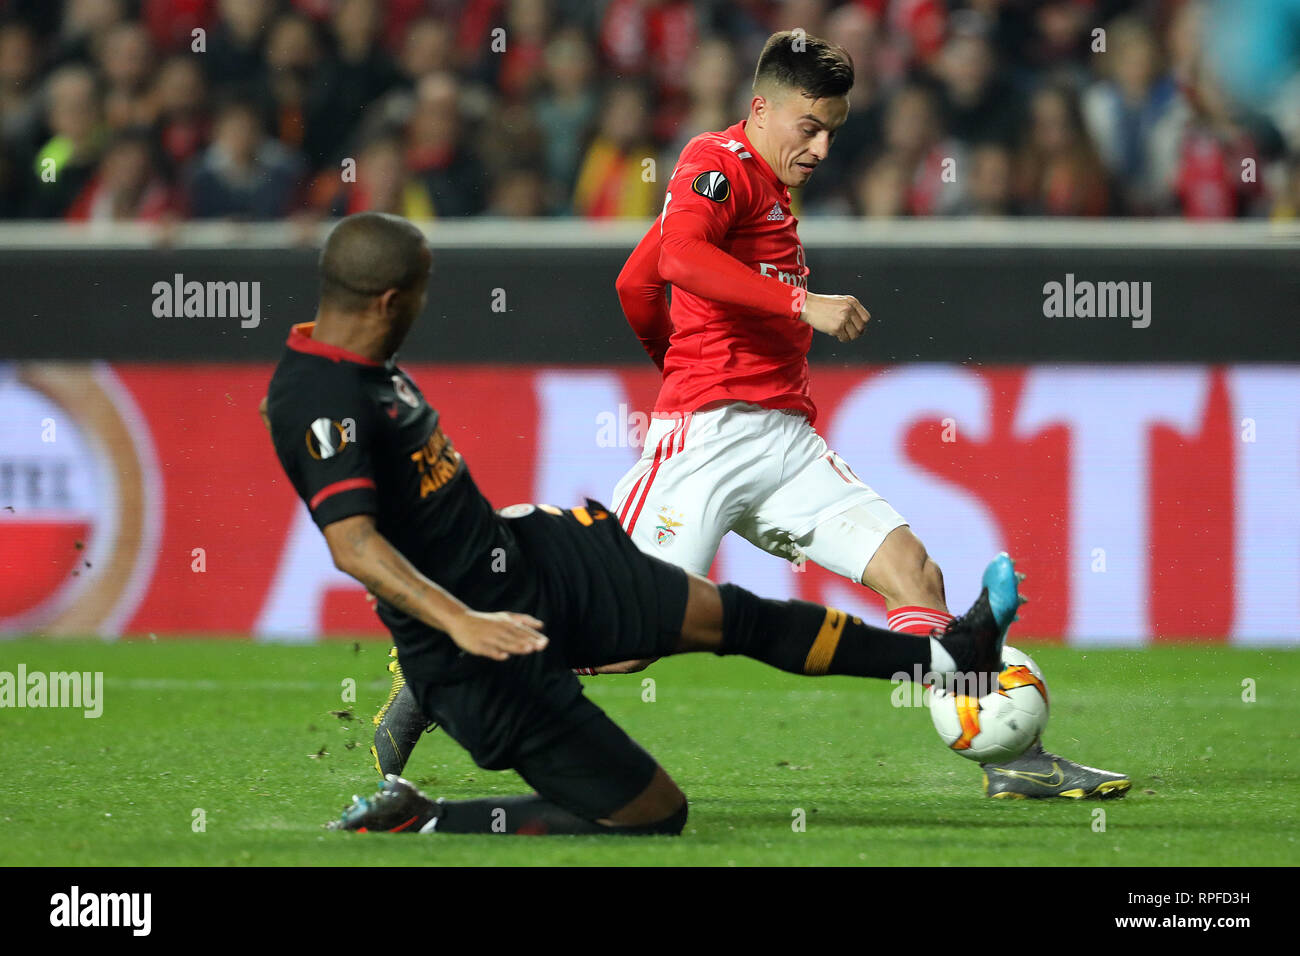 Franco Cervi of SL Benfica in action during the Europa League 2018/2019 footballl match between SL Benfica vs Galatasaray AS.  (Final score: SL Benfica 0 - 0 Galatasaray AS) Stock Photo